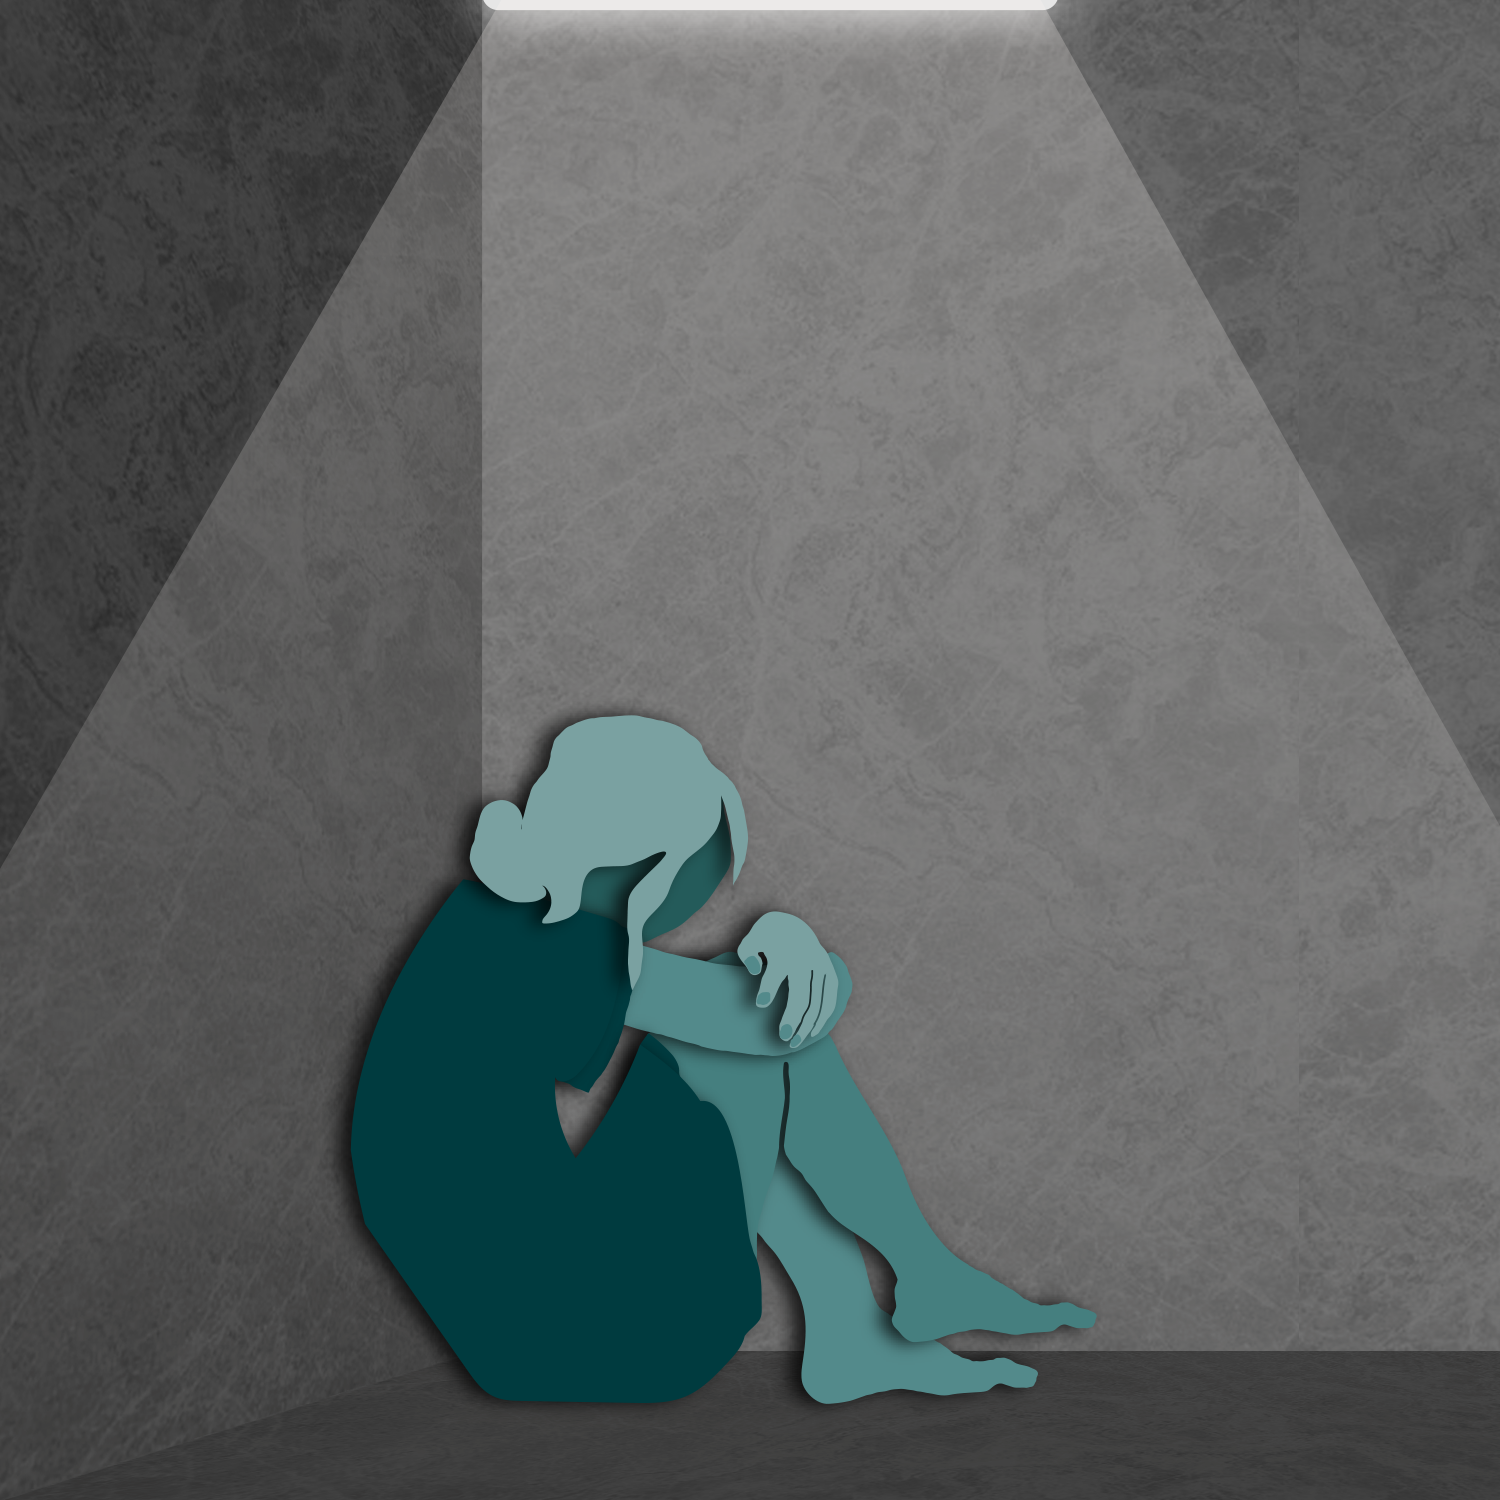 Illustration of girl in watch house cell hugging her legs